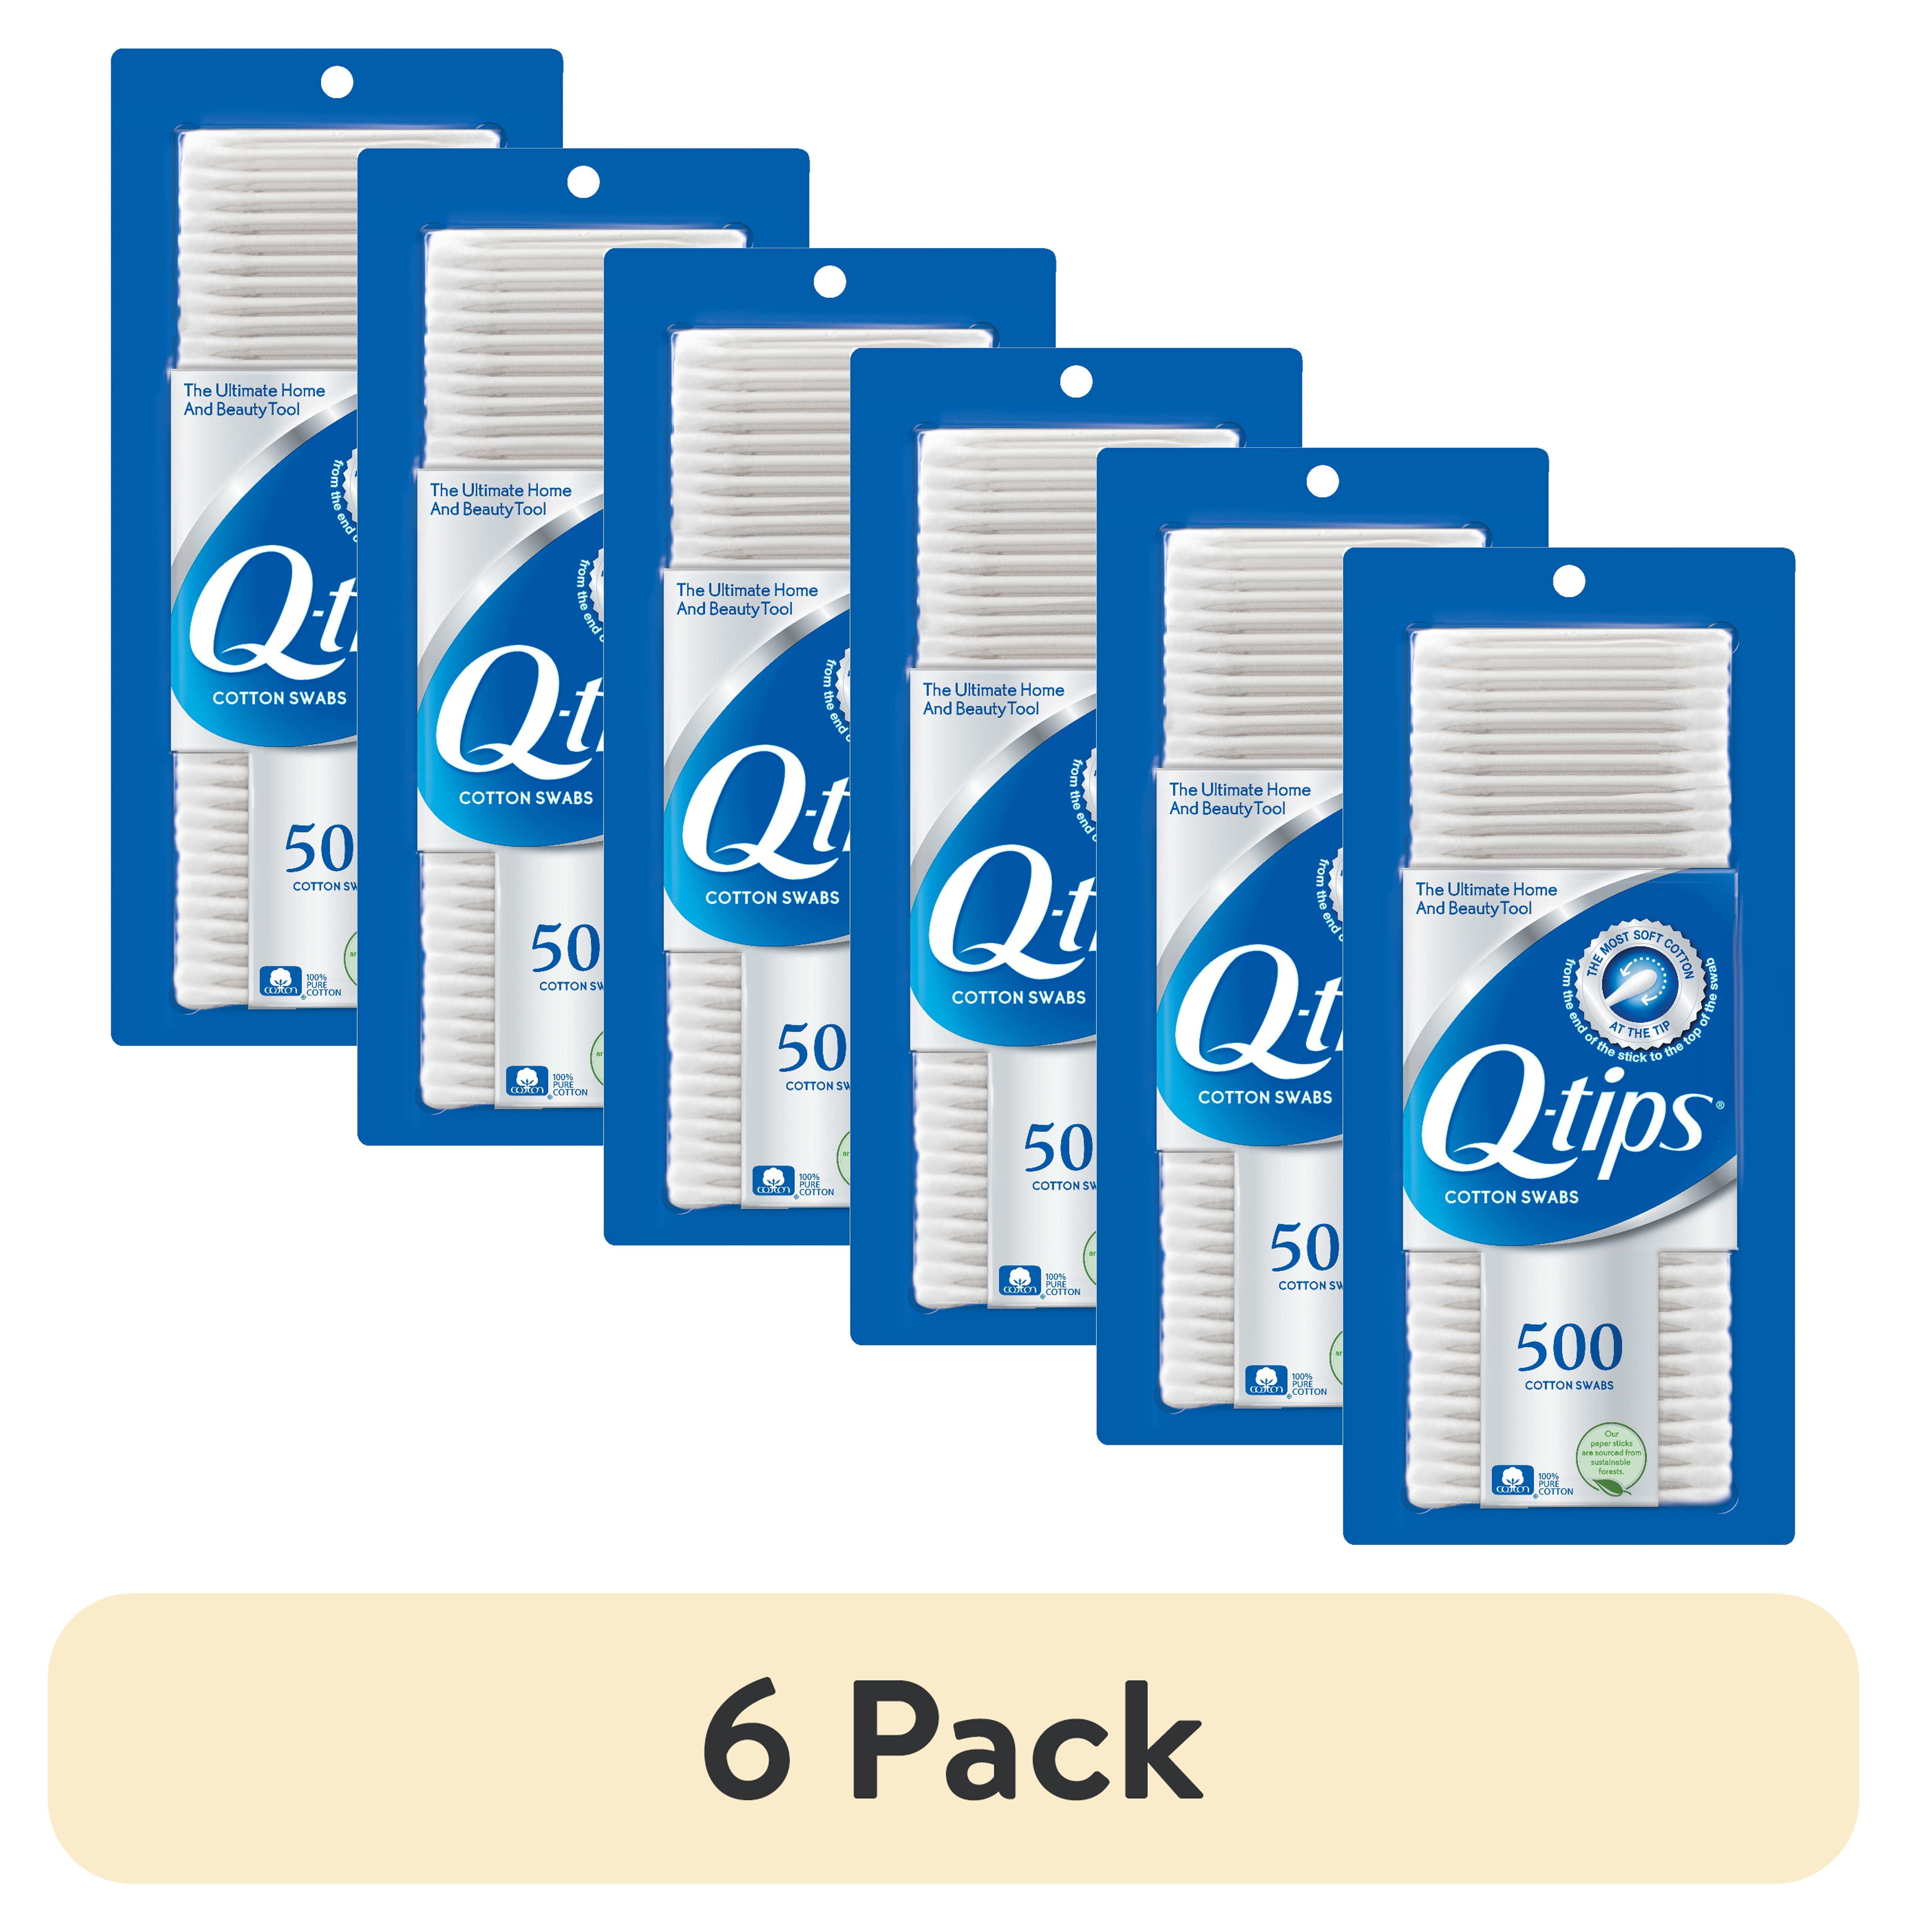 3 pack Q-tips Original Cotton Swabs 2x 625 count 1x 500 count TOTAL 1750  Sealed 305210041349